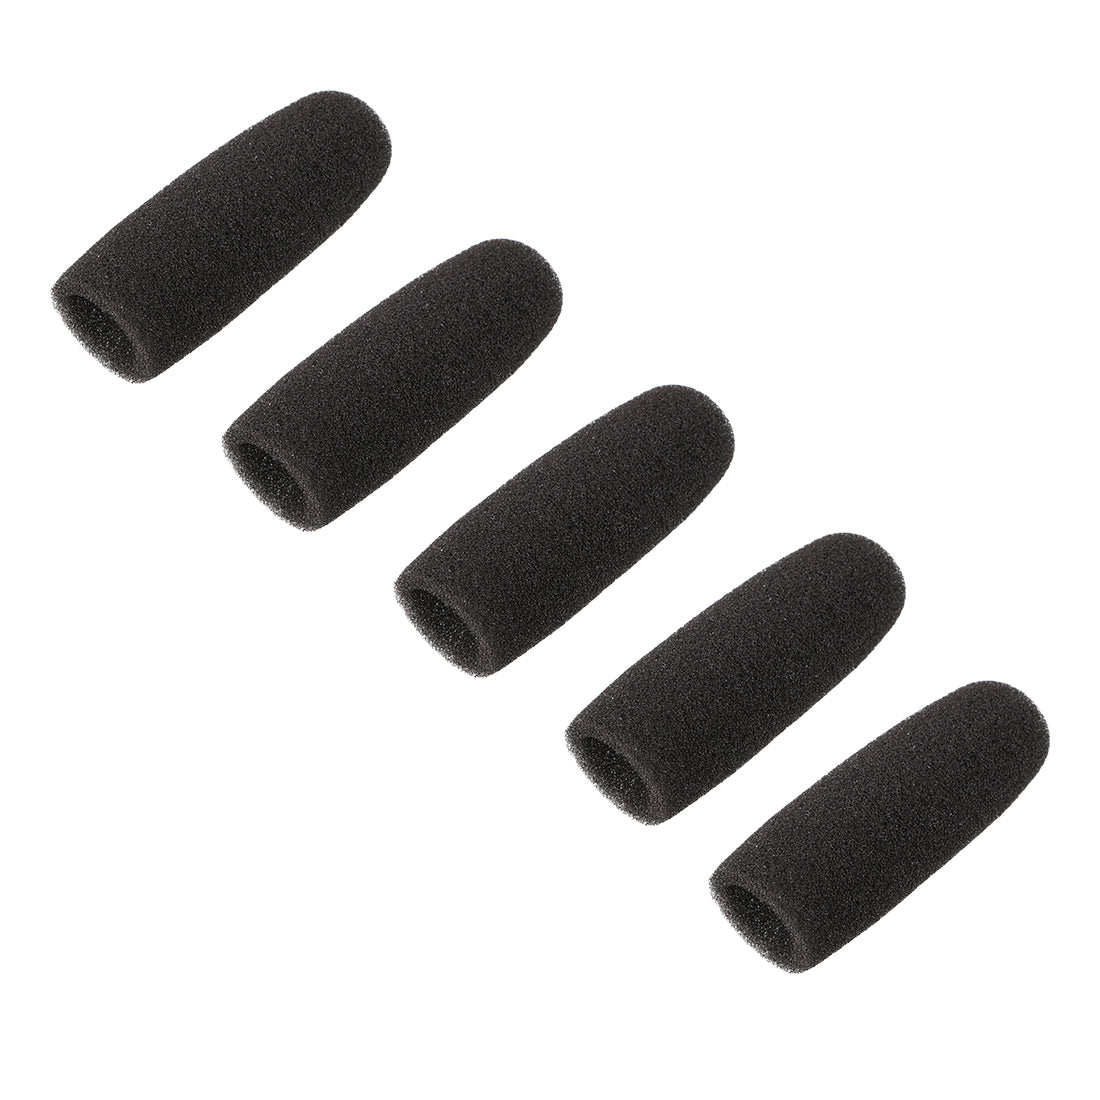 uxcell Uxcell 10PCS Sponge Foam Mic Cover Conference Microphone Windscreen Shield Protection Black 72mm Long